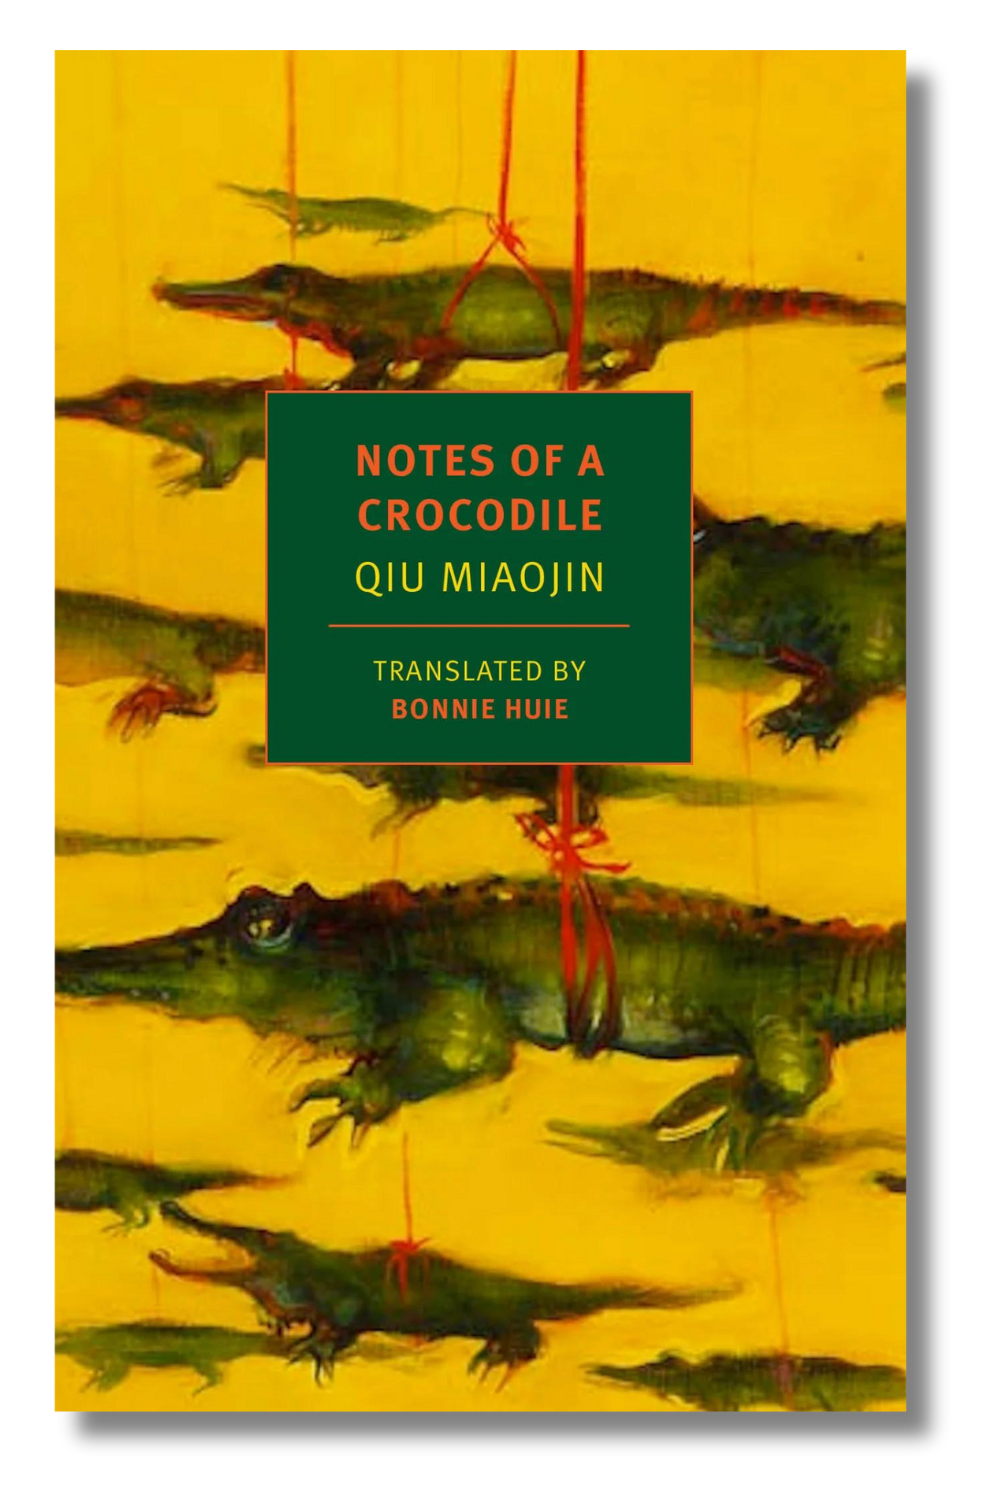 The cover of "Notes of a Crocodile" by Qiu Miaojin, translated by Bonnie Huie